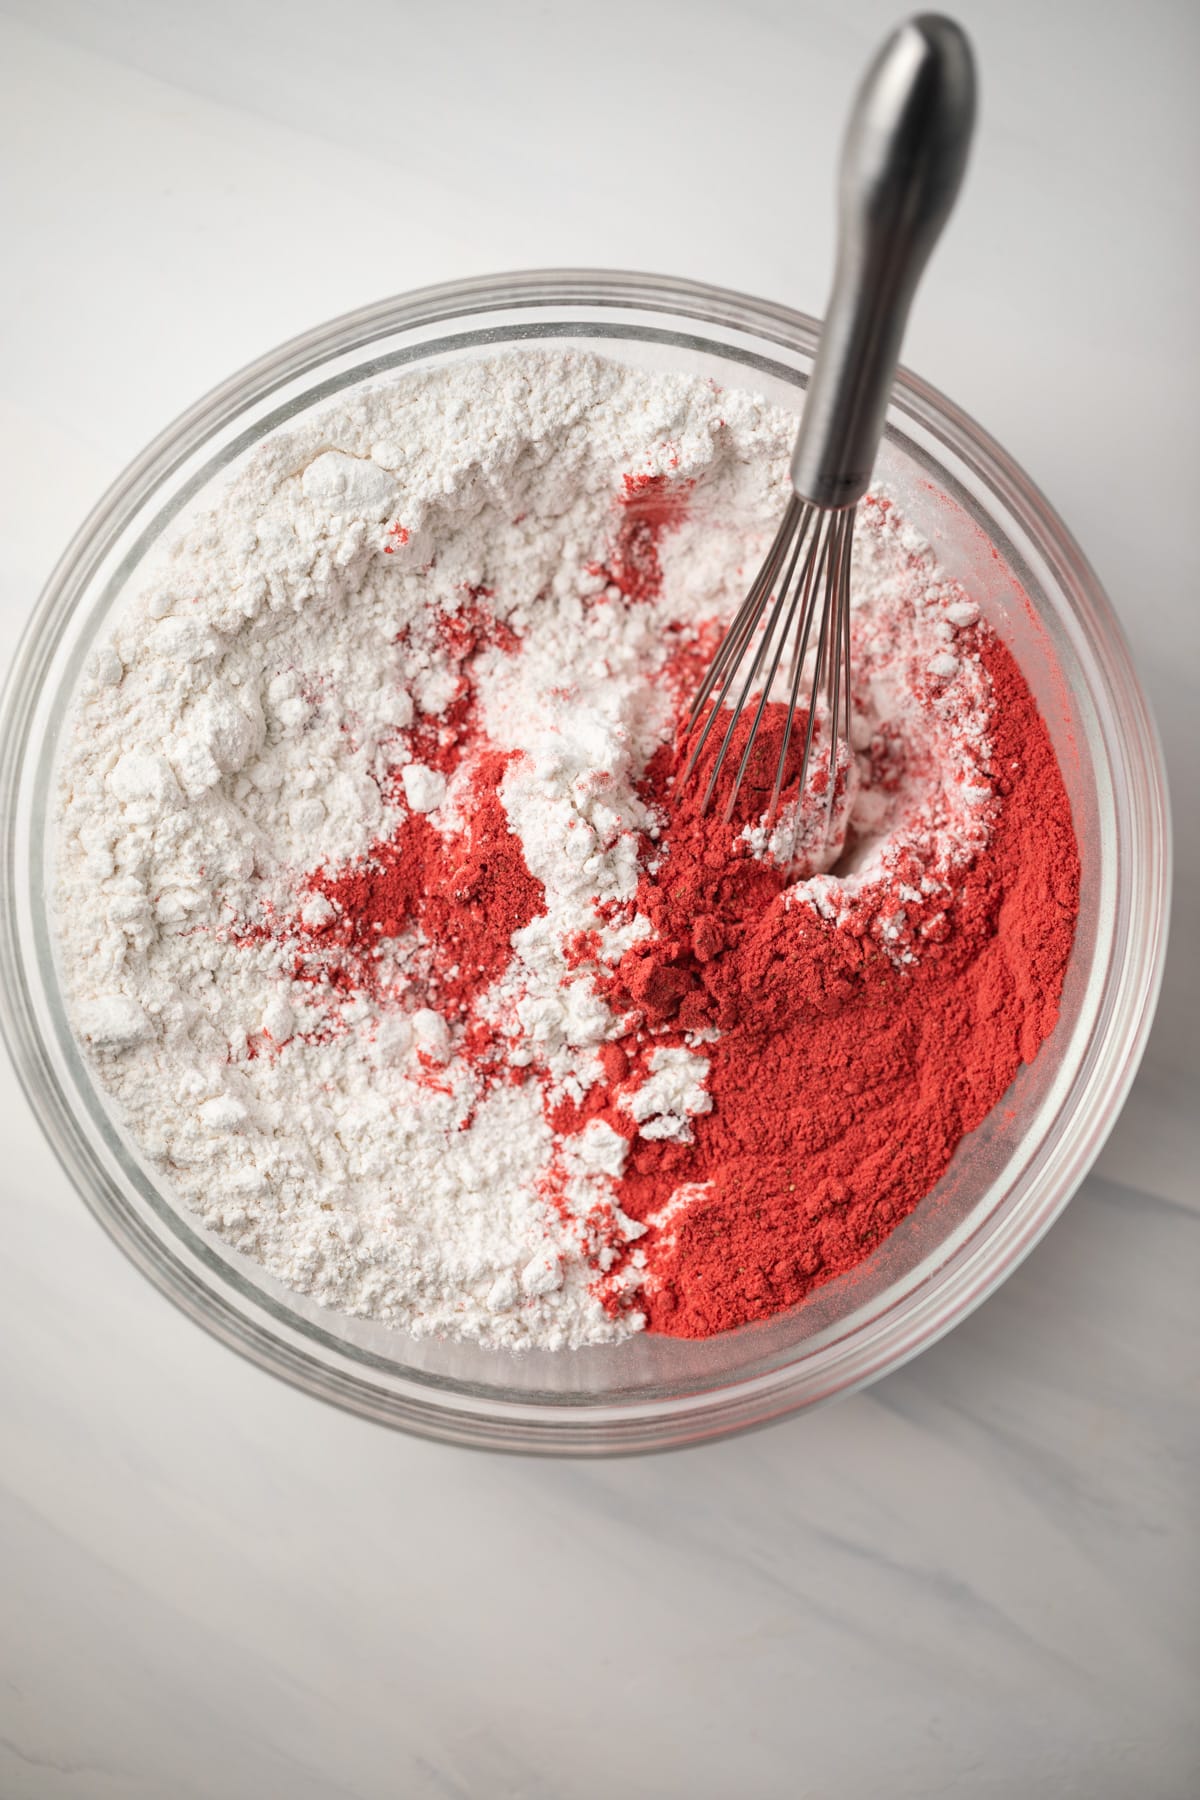 Flour and strawberry powder in glass bowl.